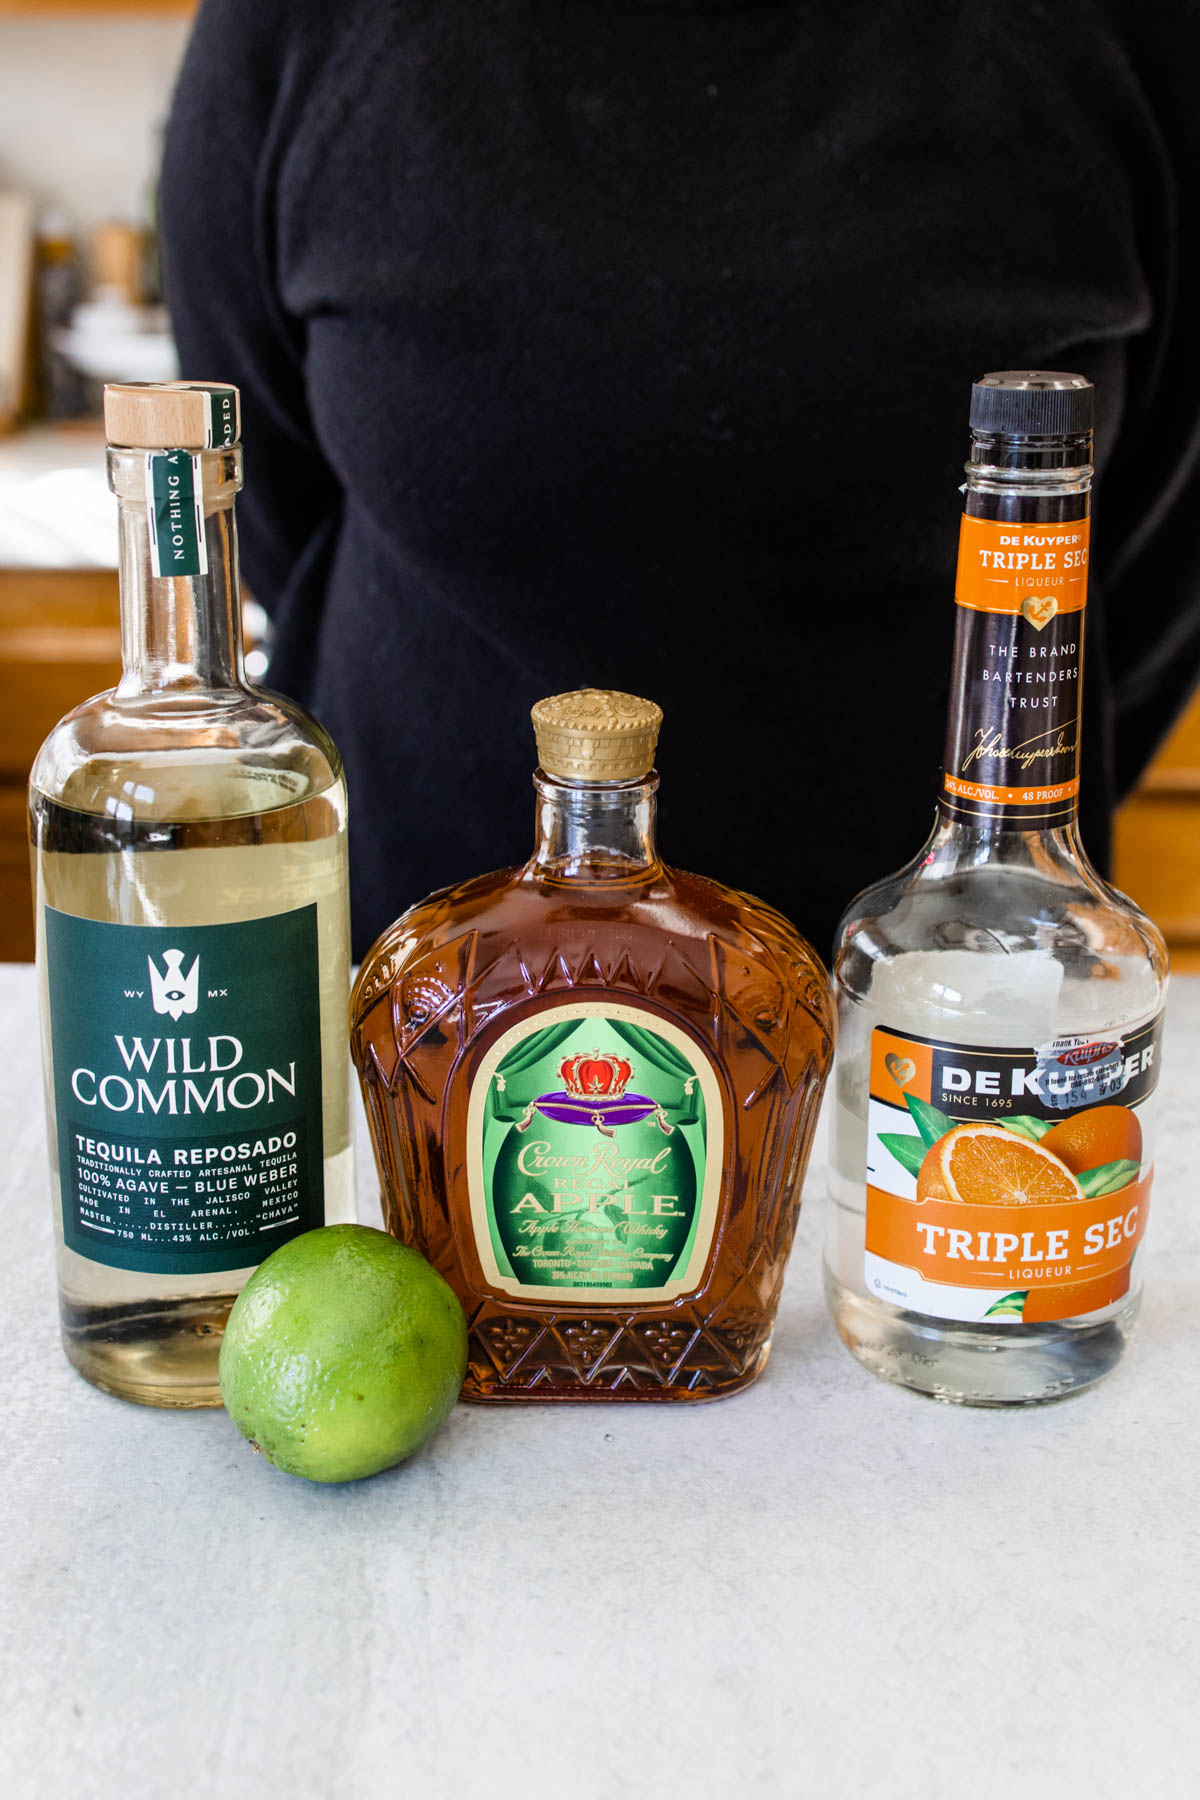 A bottle of Wild Common Tequila Reposado, Crown Royal Regal Apple Whiskey, Triple Sec, and fresh lime.